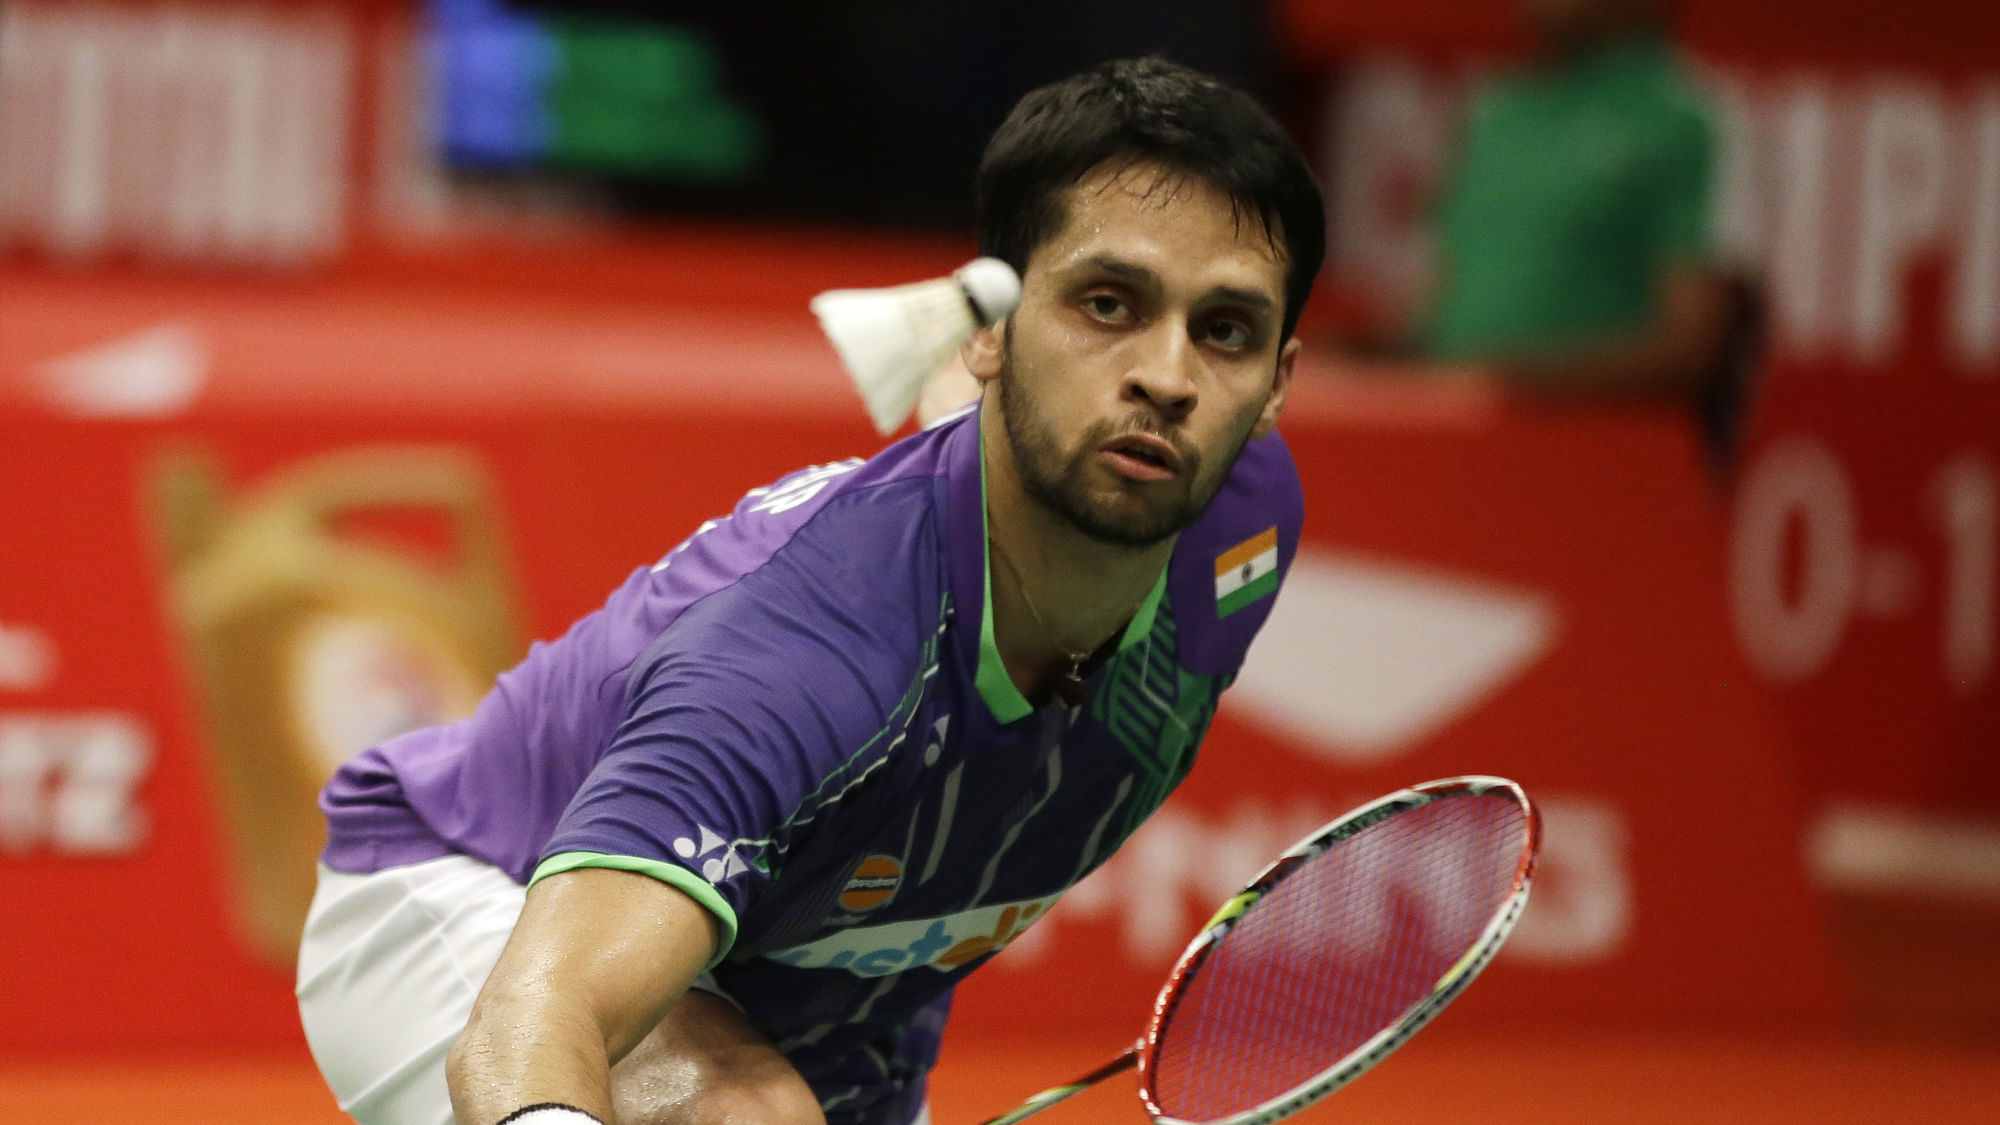 Parupalli Kashyap in action at the Badminton World Federation Championship in August.